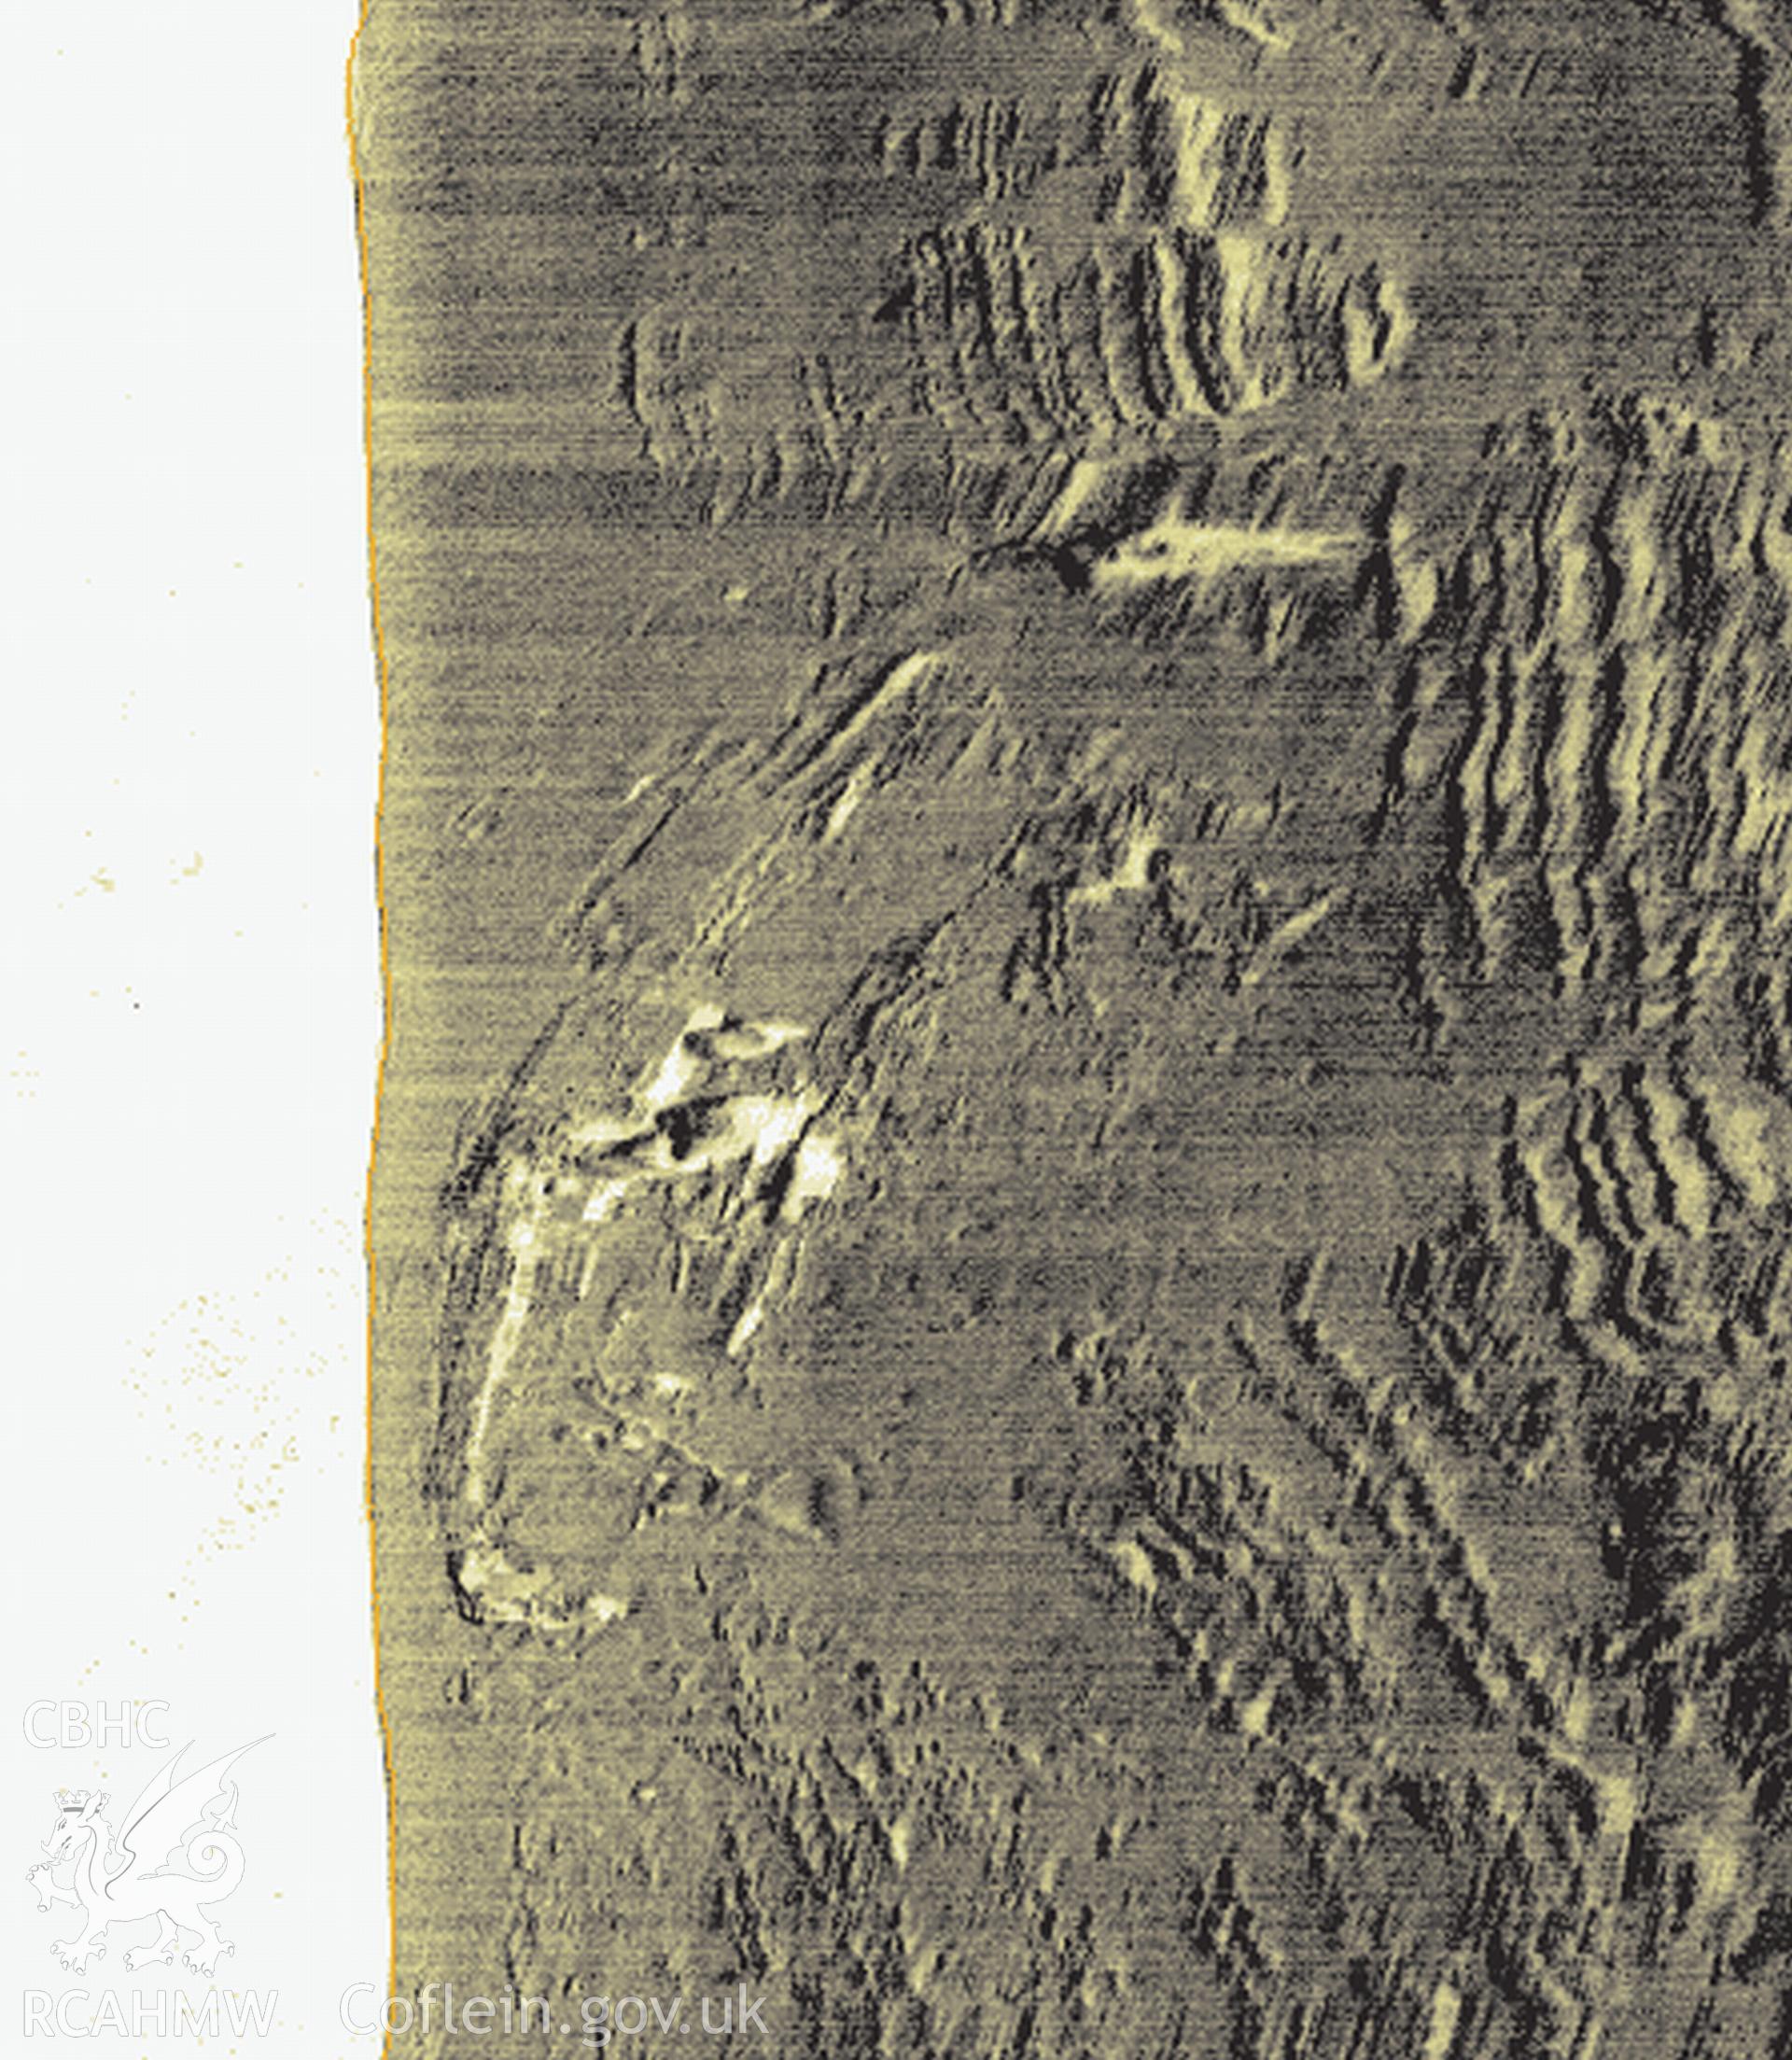 Side scan sonar image of the St Jacques gathered by Wessex Archaeology  and published in Wrecks off the Coast of Wales, November 2010, Report Ref No : 53111.02, fig 11 B.7021. The wrecks lies on a sandy seabed.